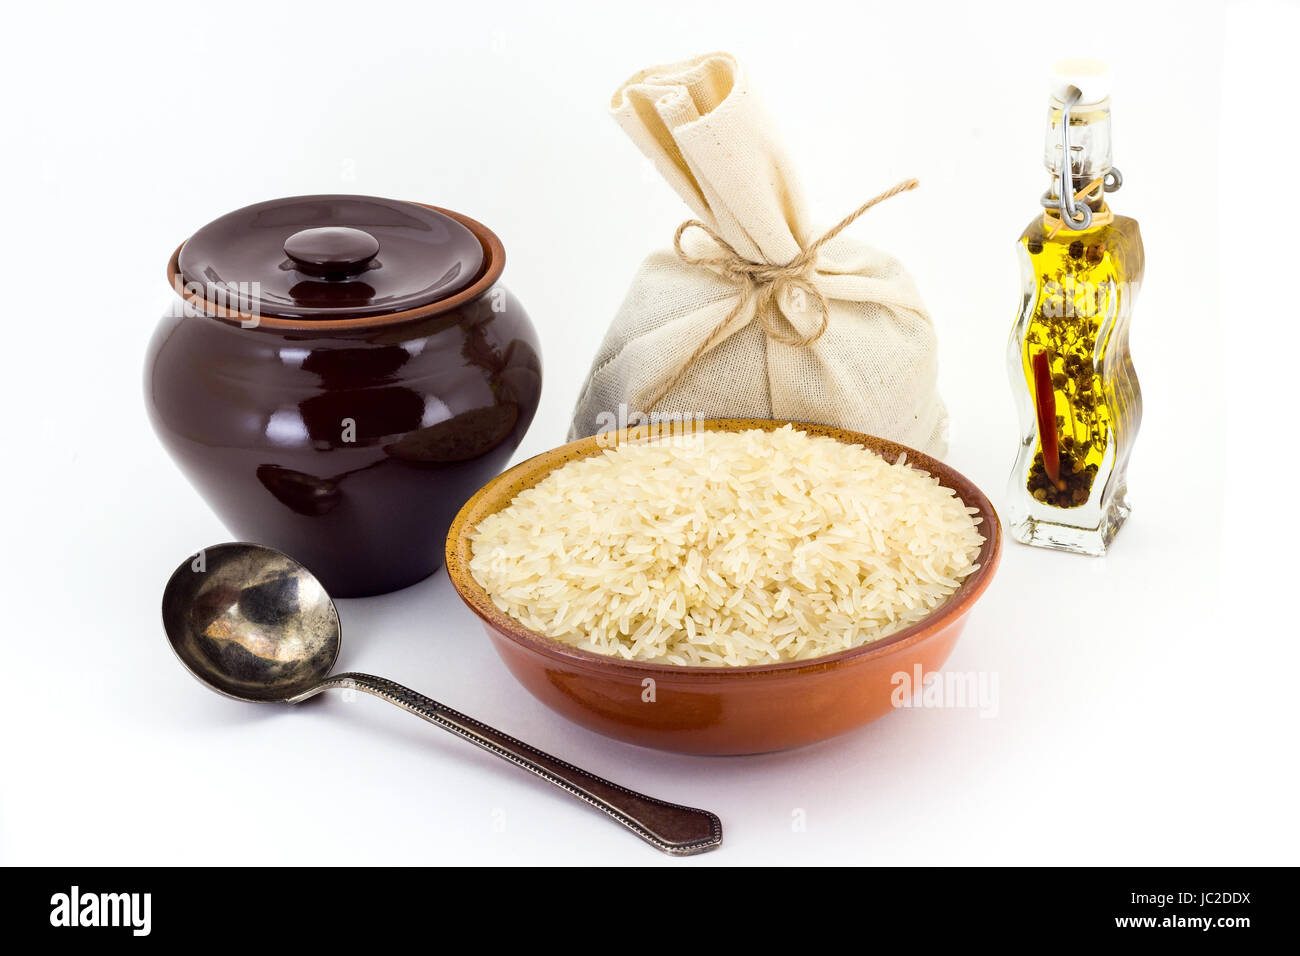 Still life of Steamed rice cereal in ceramic pial, ceramic pot, old spoon and canvas bag for cereals, oil with spices and seasonings, isolated on whit Stock Photo